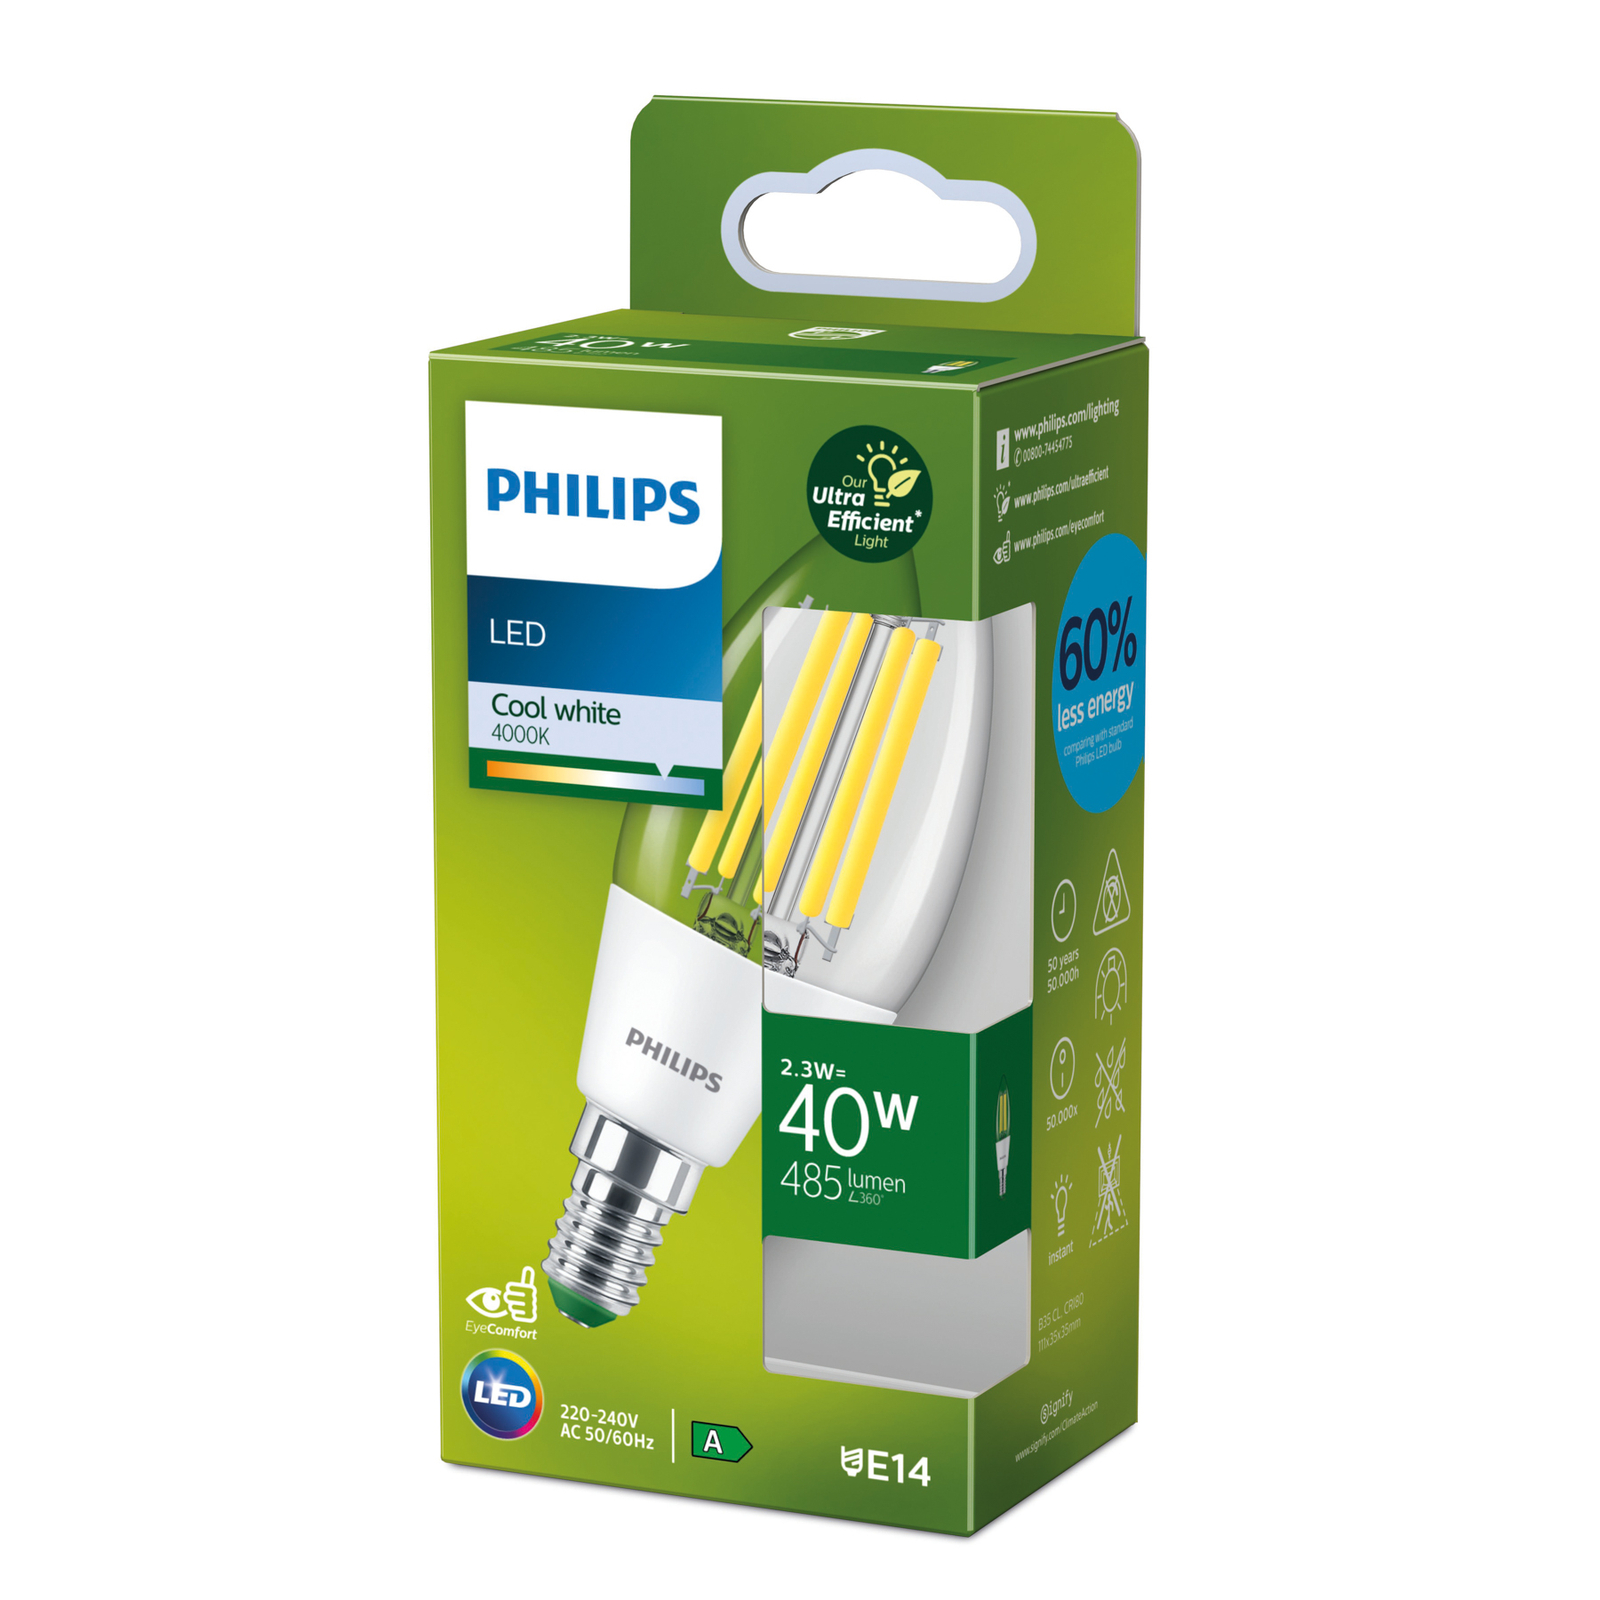 Philips E14 LED candle C35 2.3W 485lm 4,000K clear